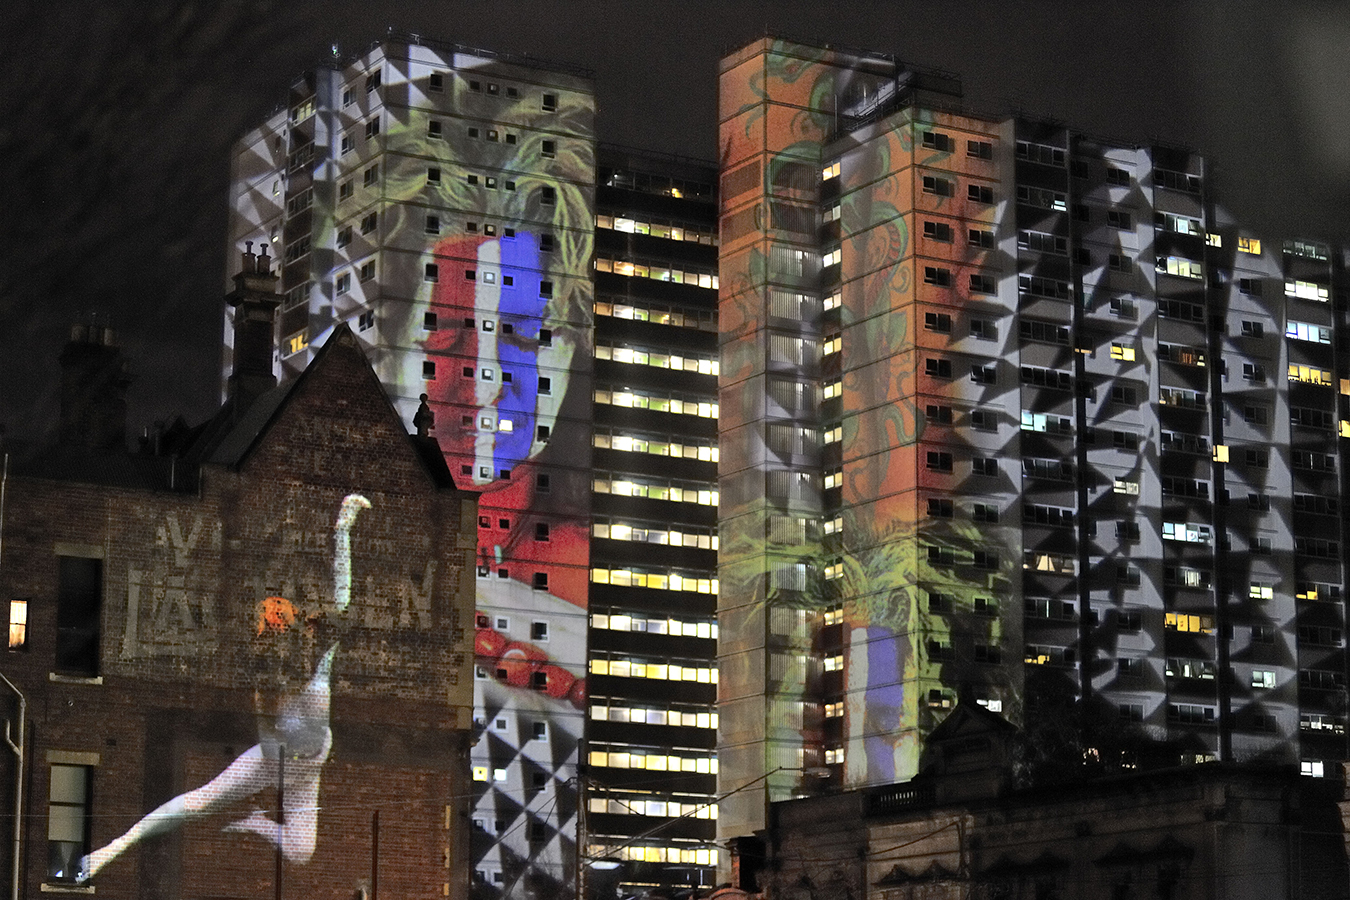 Projections on building from Gertrude Street Projection Festival 2016